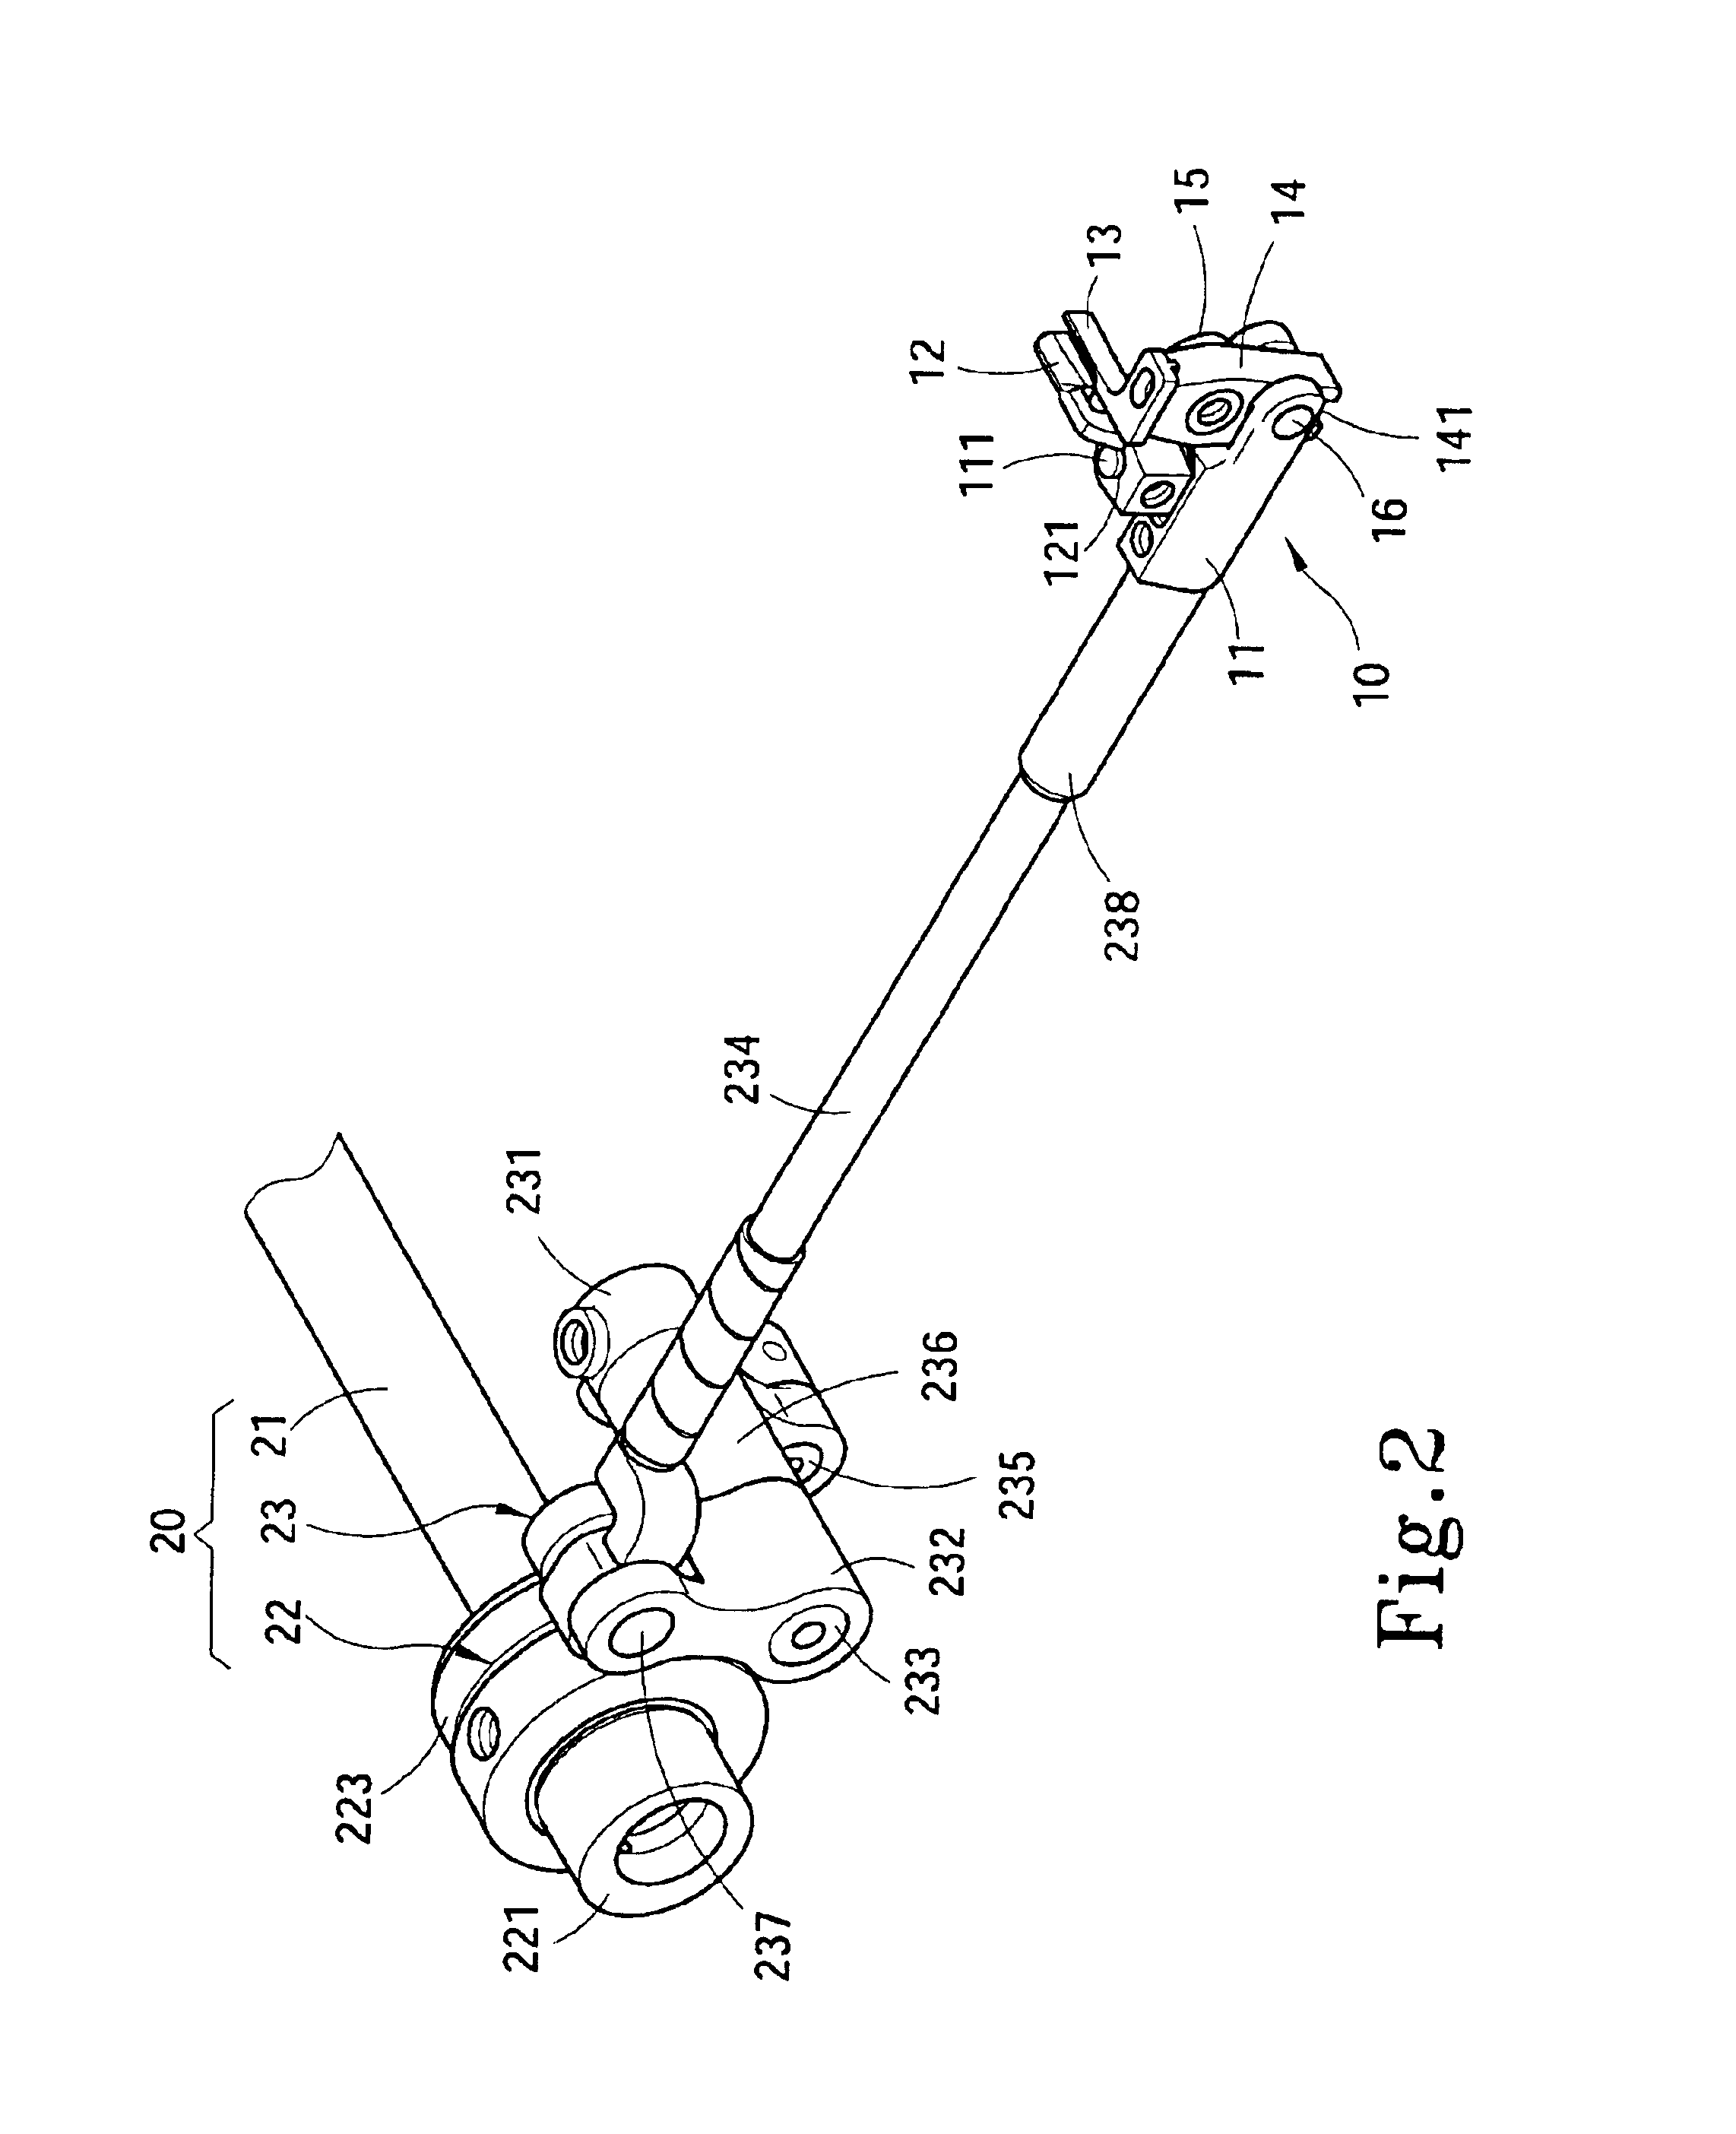 Needle guard mechanism for sewing machines